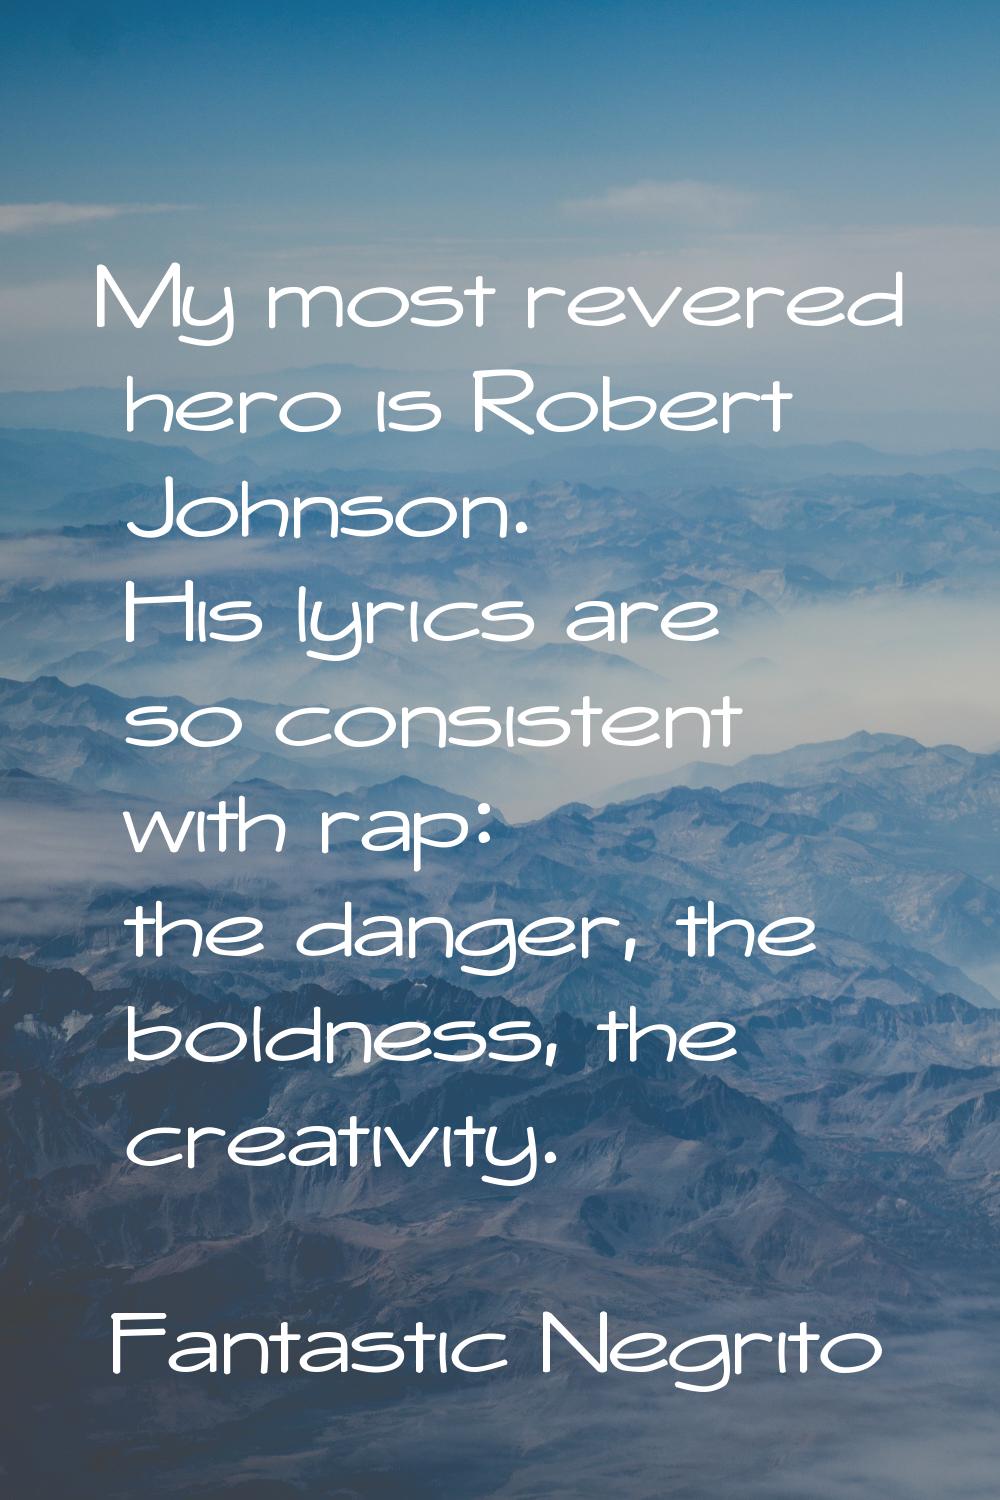 My most revered hero is Robert Johnson. His lyrics are so consistent with rap: the danger, the bold